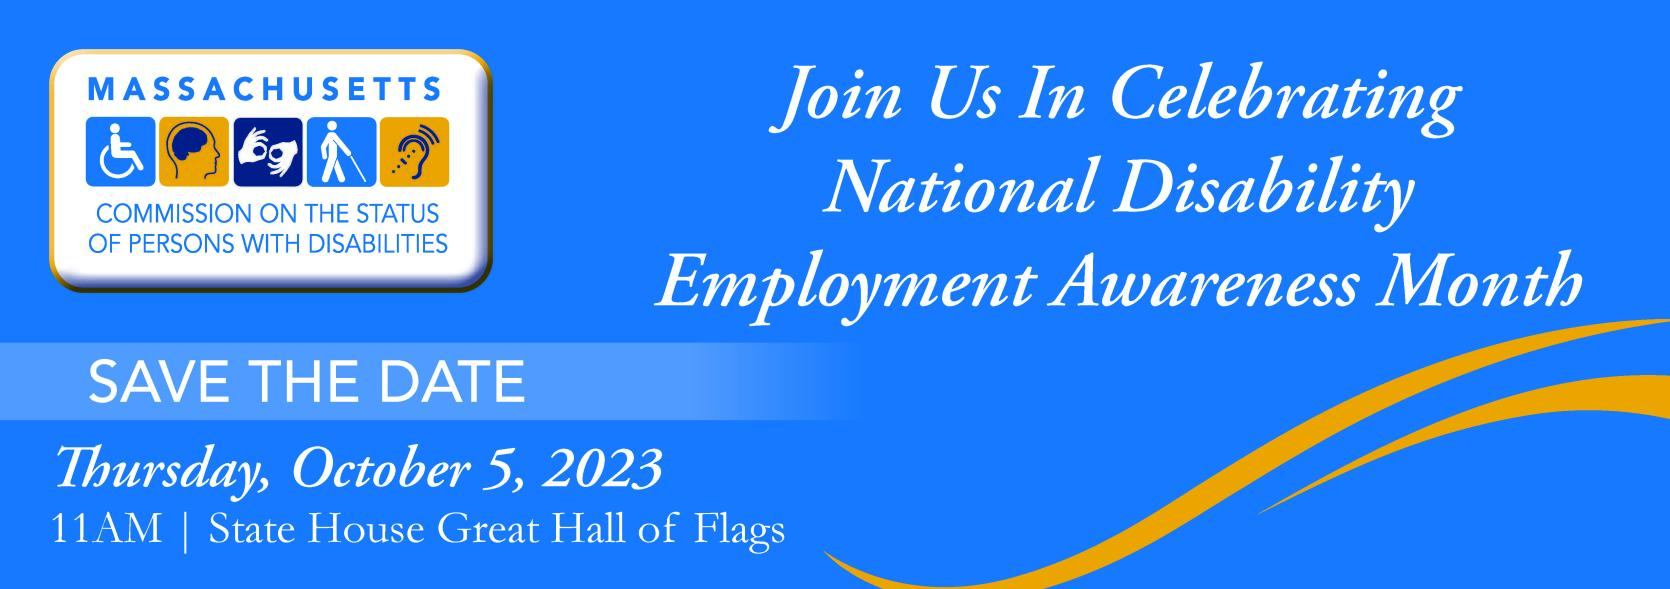 Join us in celebrating National Disability Employment Awareness Month, Save the Date Thursday October 5 2023 at 11am in the Great Hall of Flags at the MA State House.